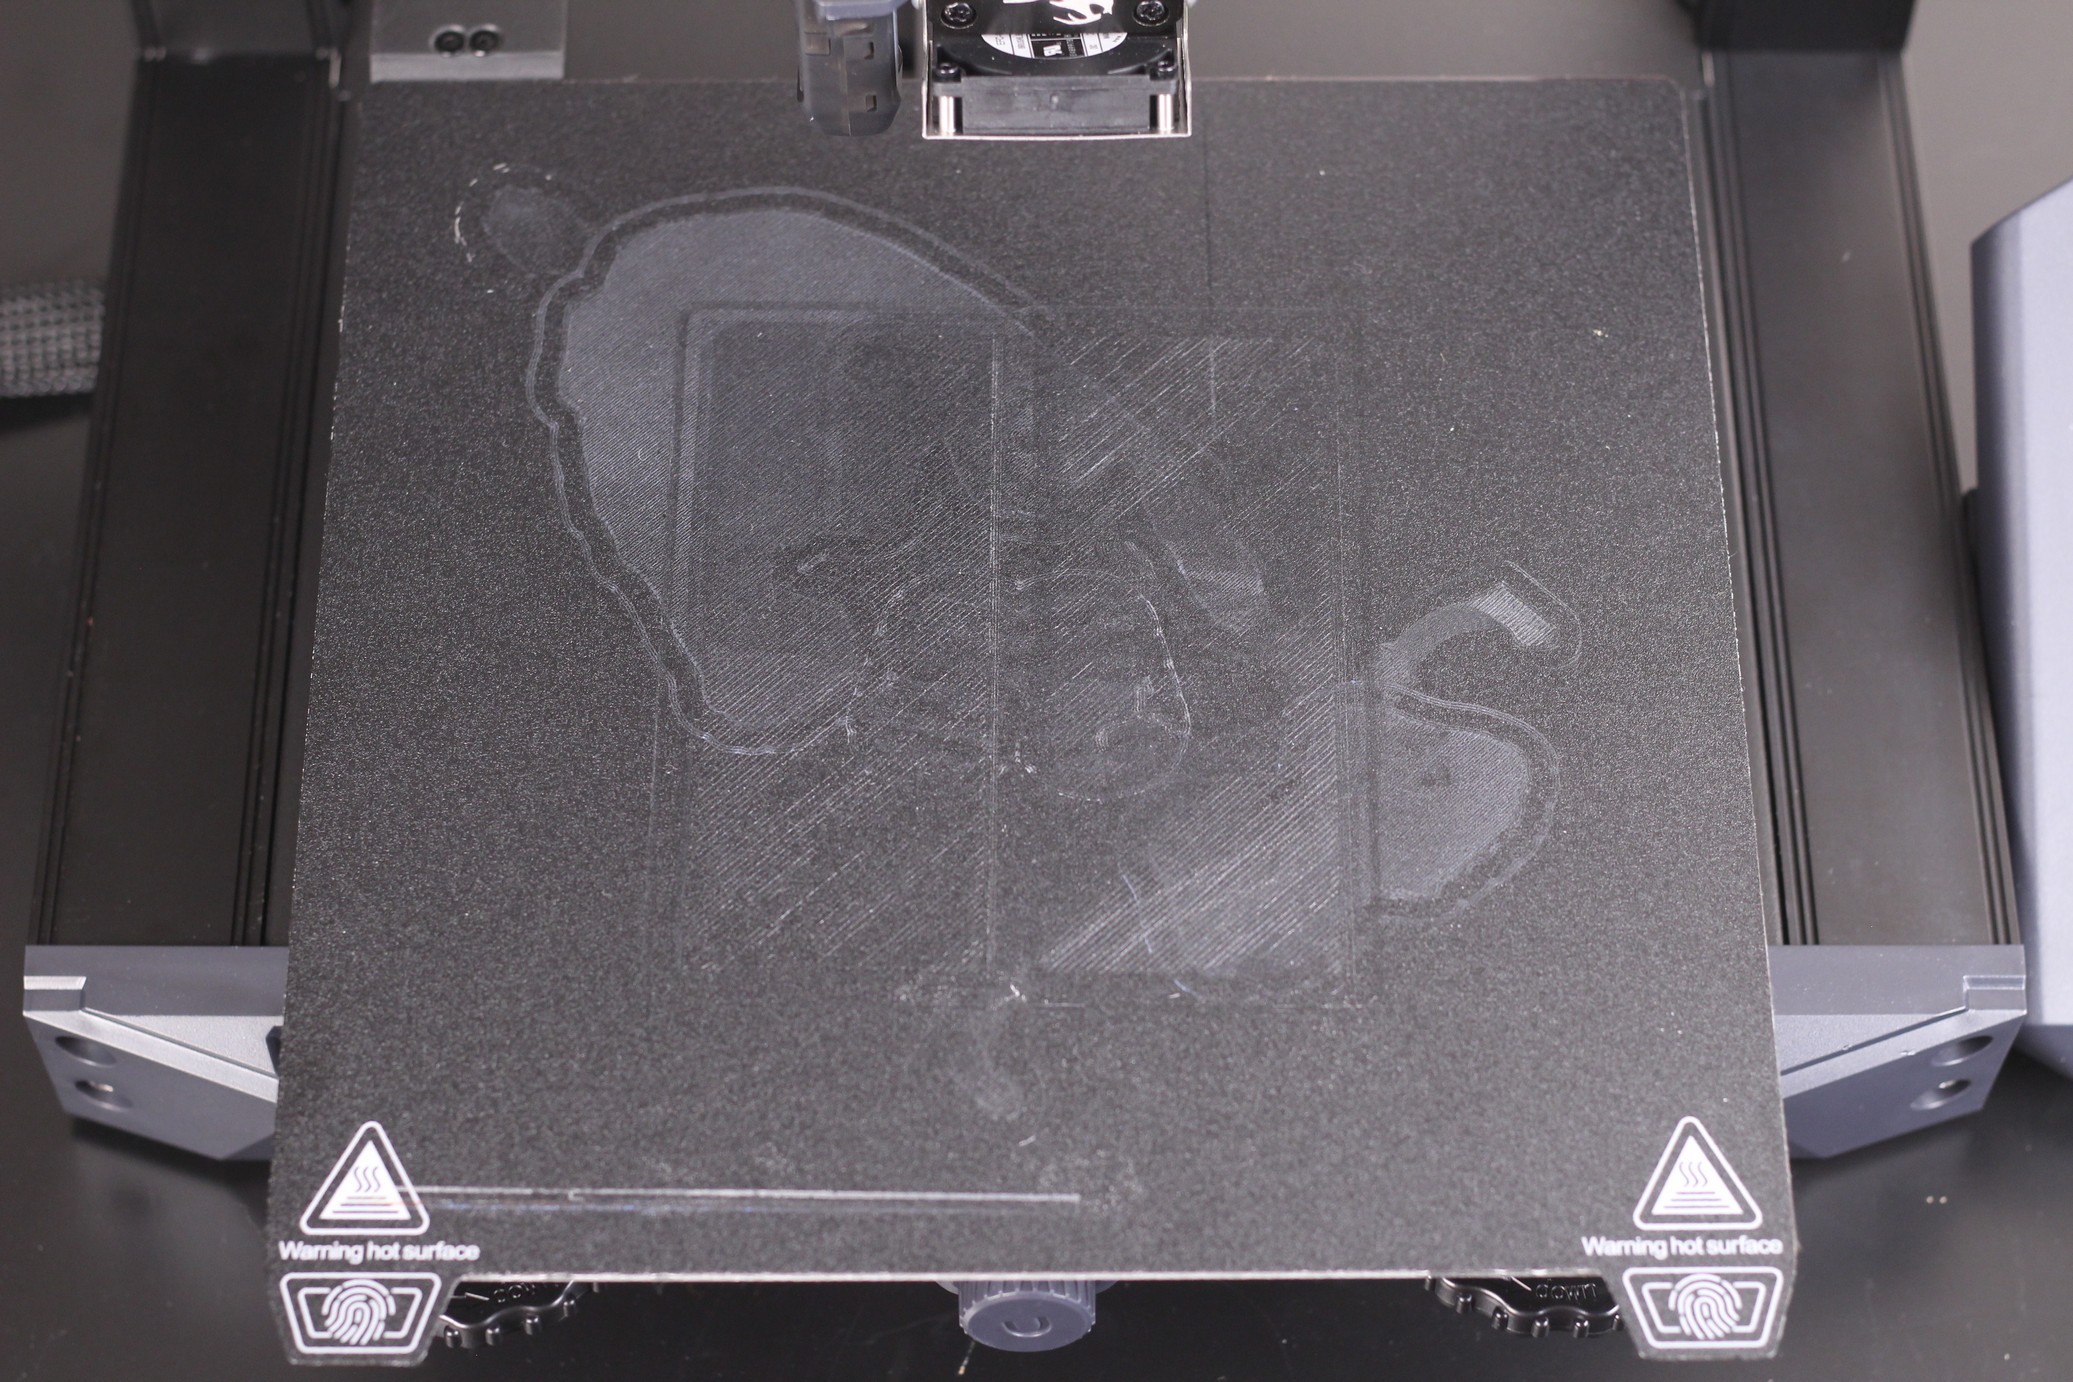 Creality Ender 3 S1 PC print surface 1 | Creality Ender 3 S1 Review: Almost Perfect